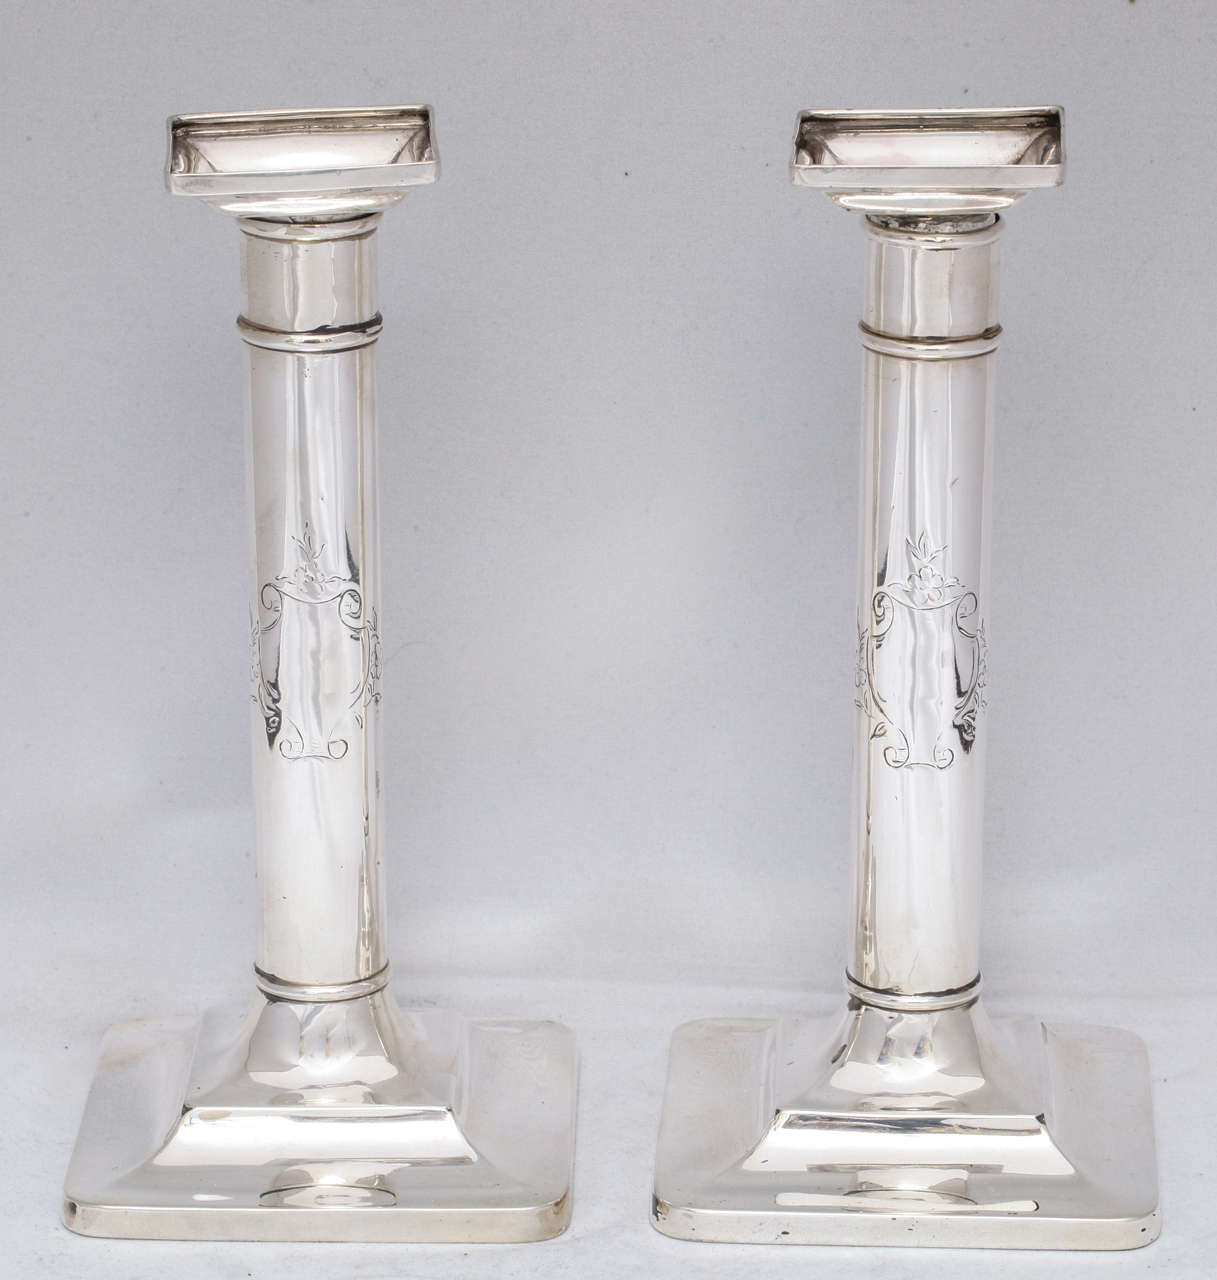 American Pair of Tiffany Sterling Silver Column Form Candlesticks